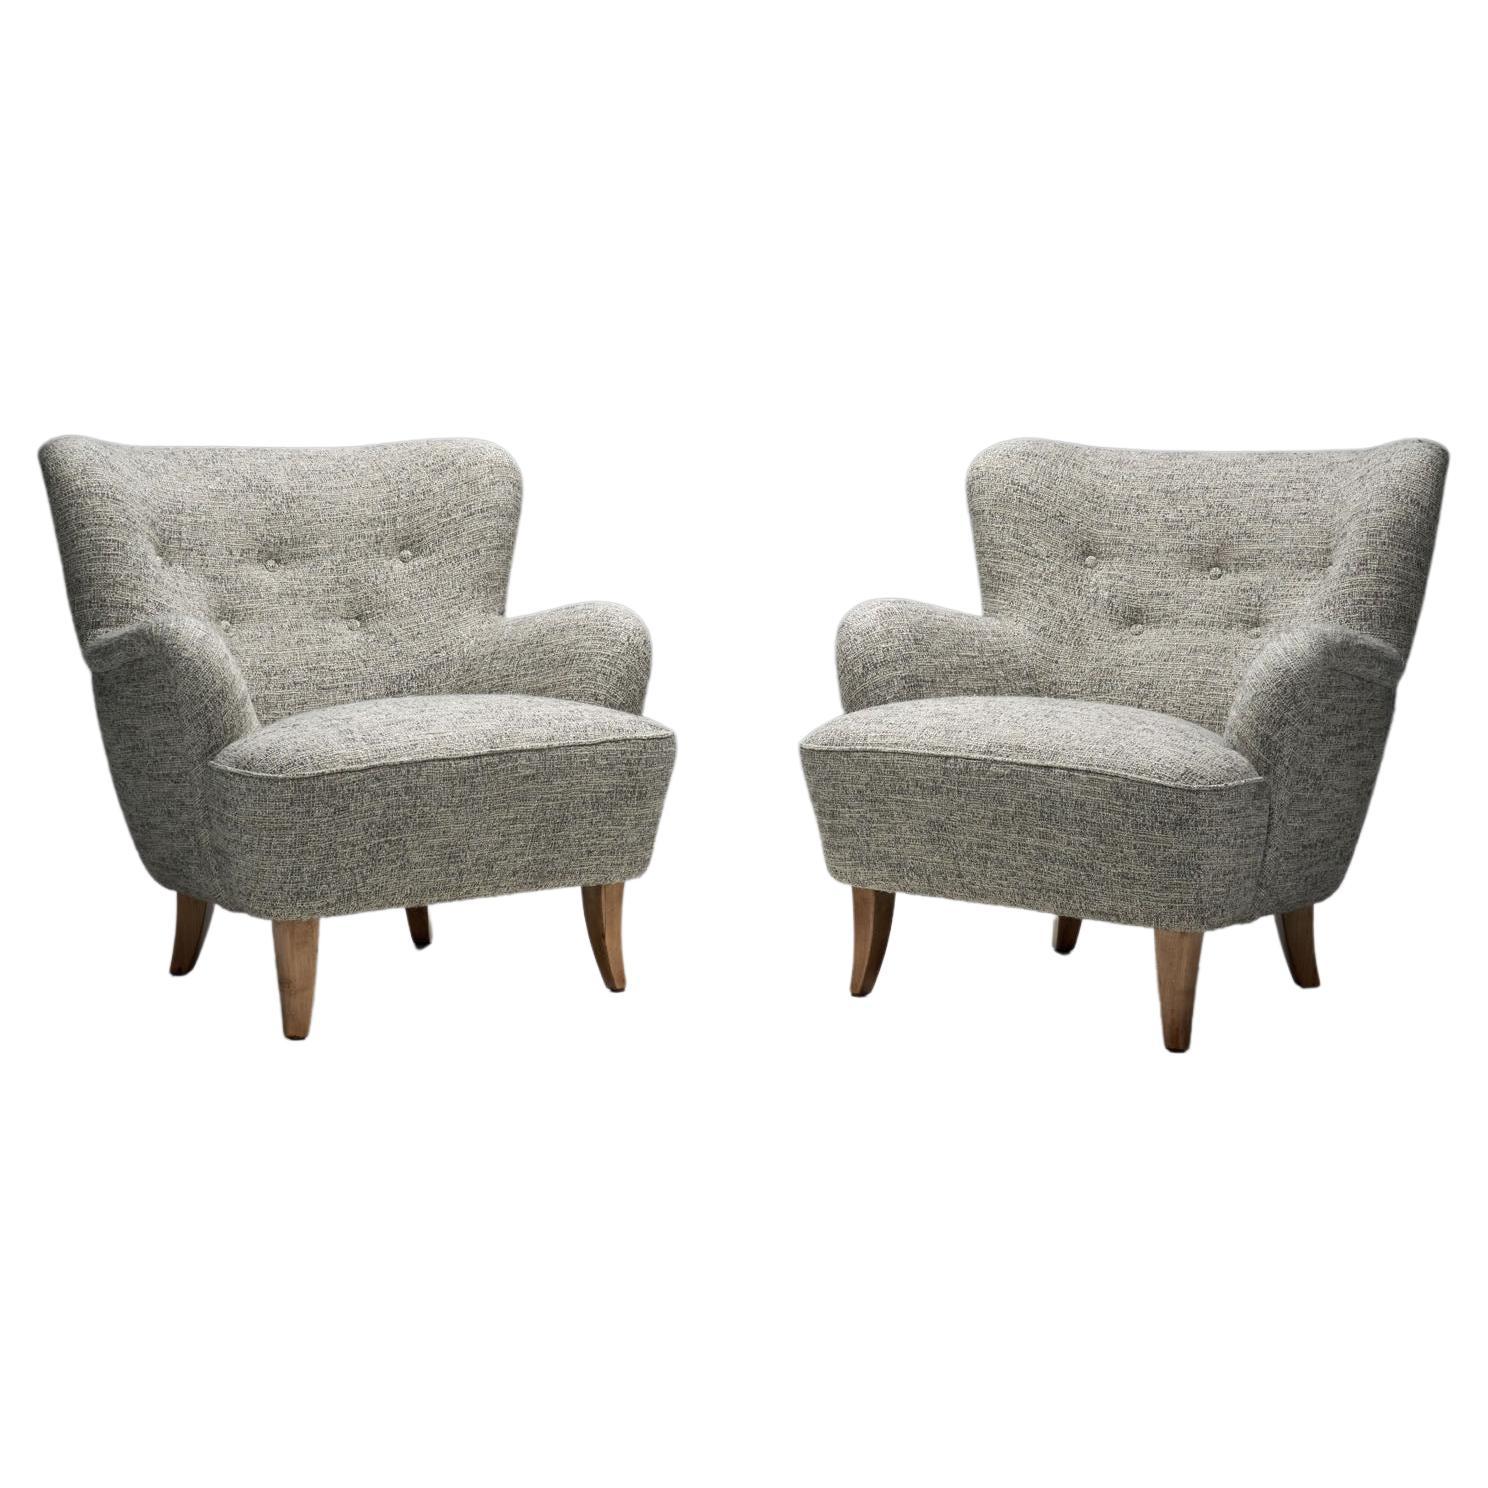 Pair of “Laila” Armchairs by Ilmari Lappalainen for Asko, Finland, 1948 For Sale